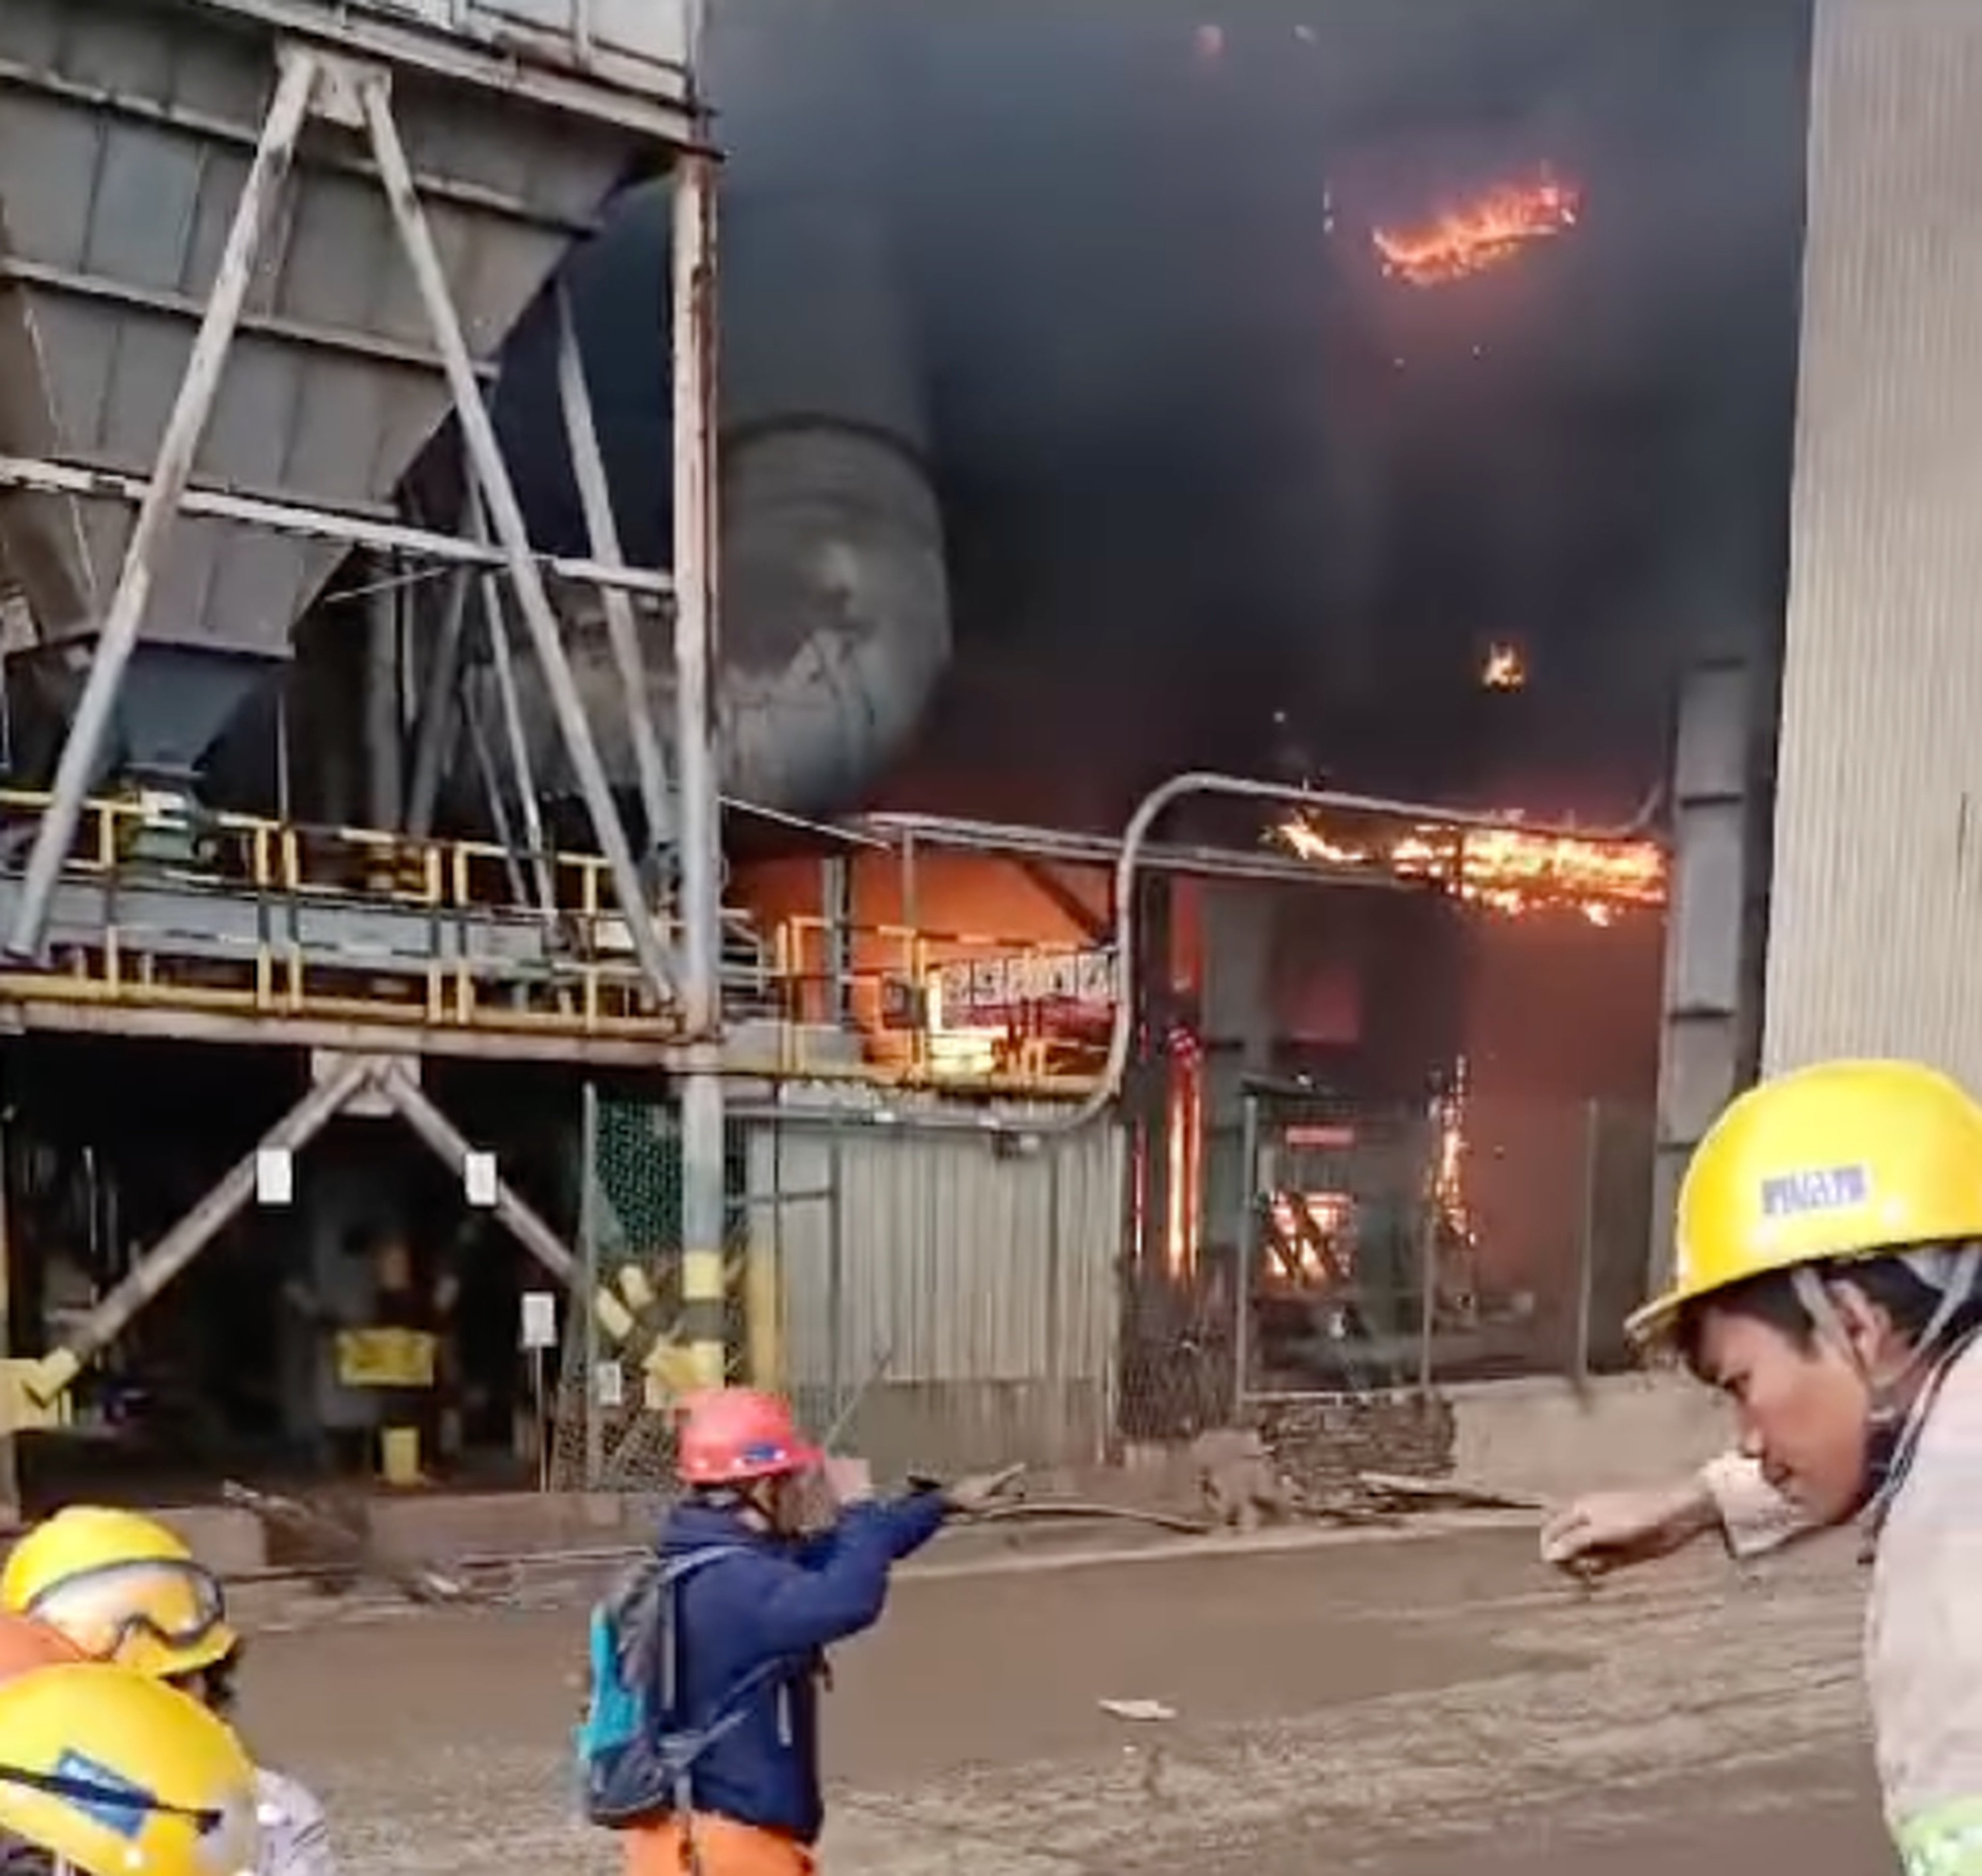 Several people were killed and dozens injured in an explosion at a smelter furnace in Indonesia’s Morowali nickel industrial park, local media said on Sunday. Photo: Facebook/JATAM